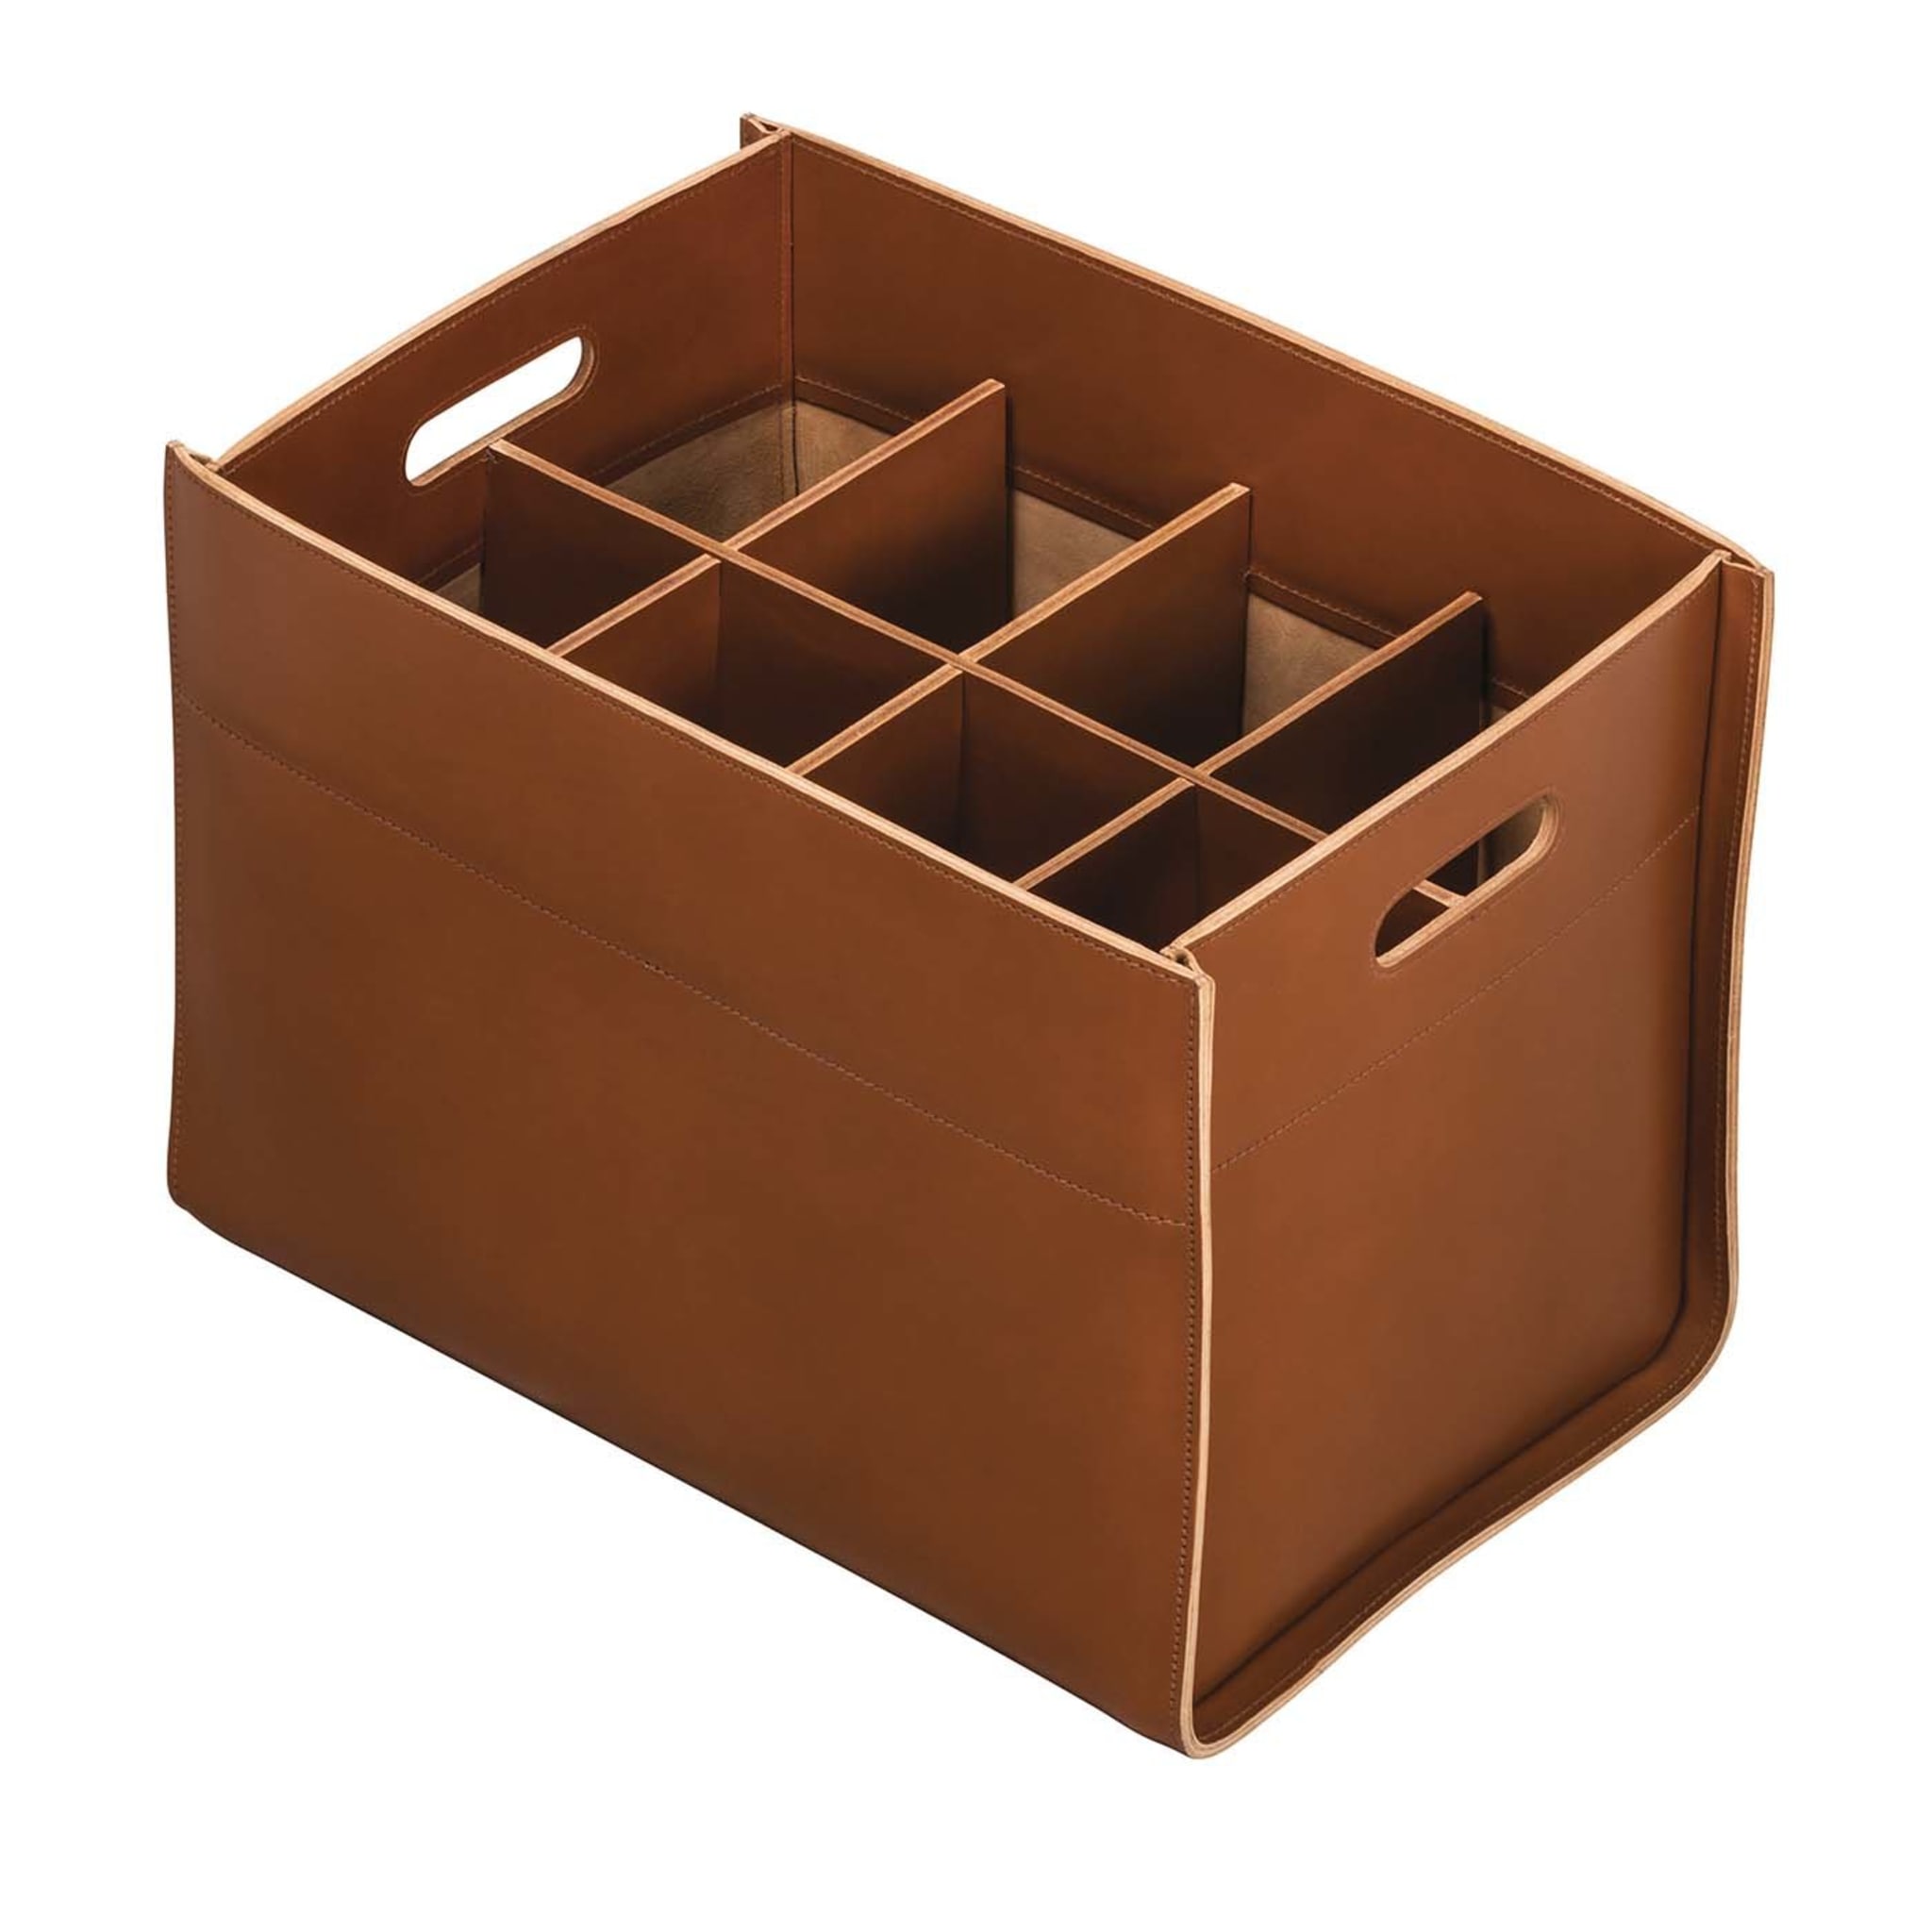 Delta Rectangular 6-Compartment Basket in Caramel Leather - Main view